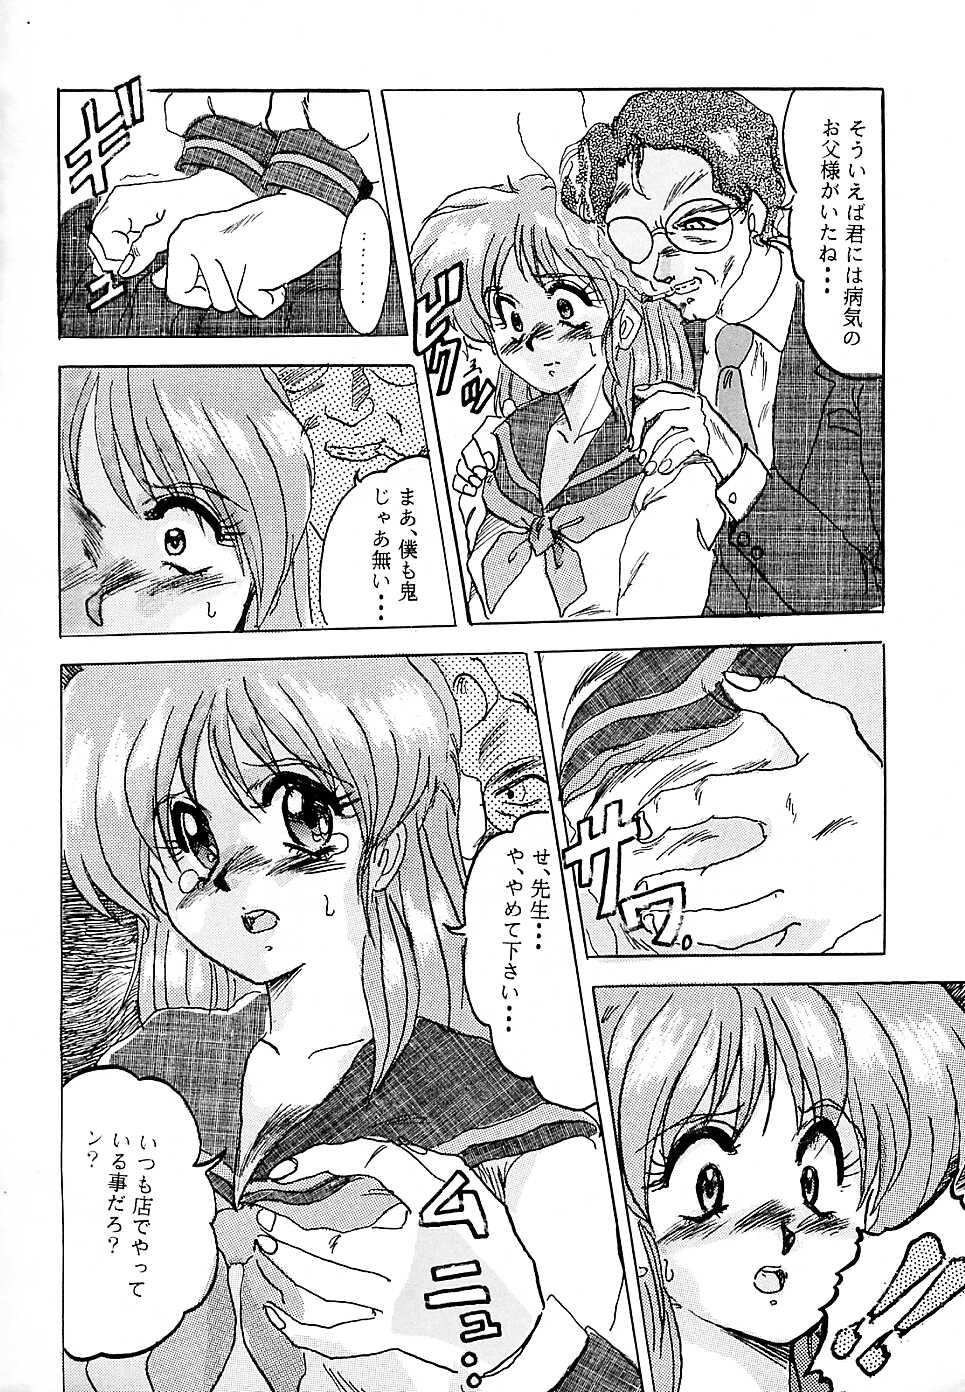 Fit F 93C - Brave express might gaine Big Dicks - Page 5